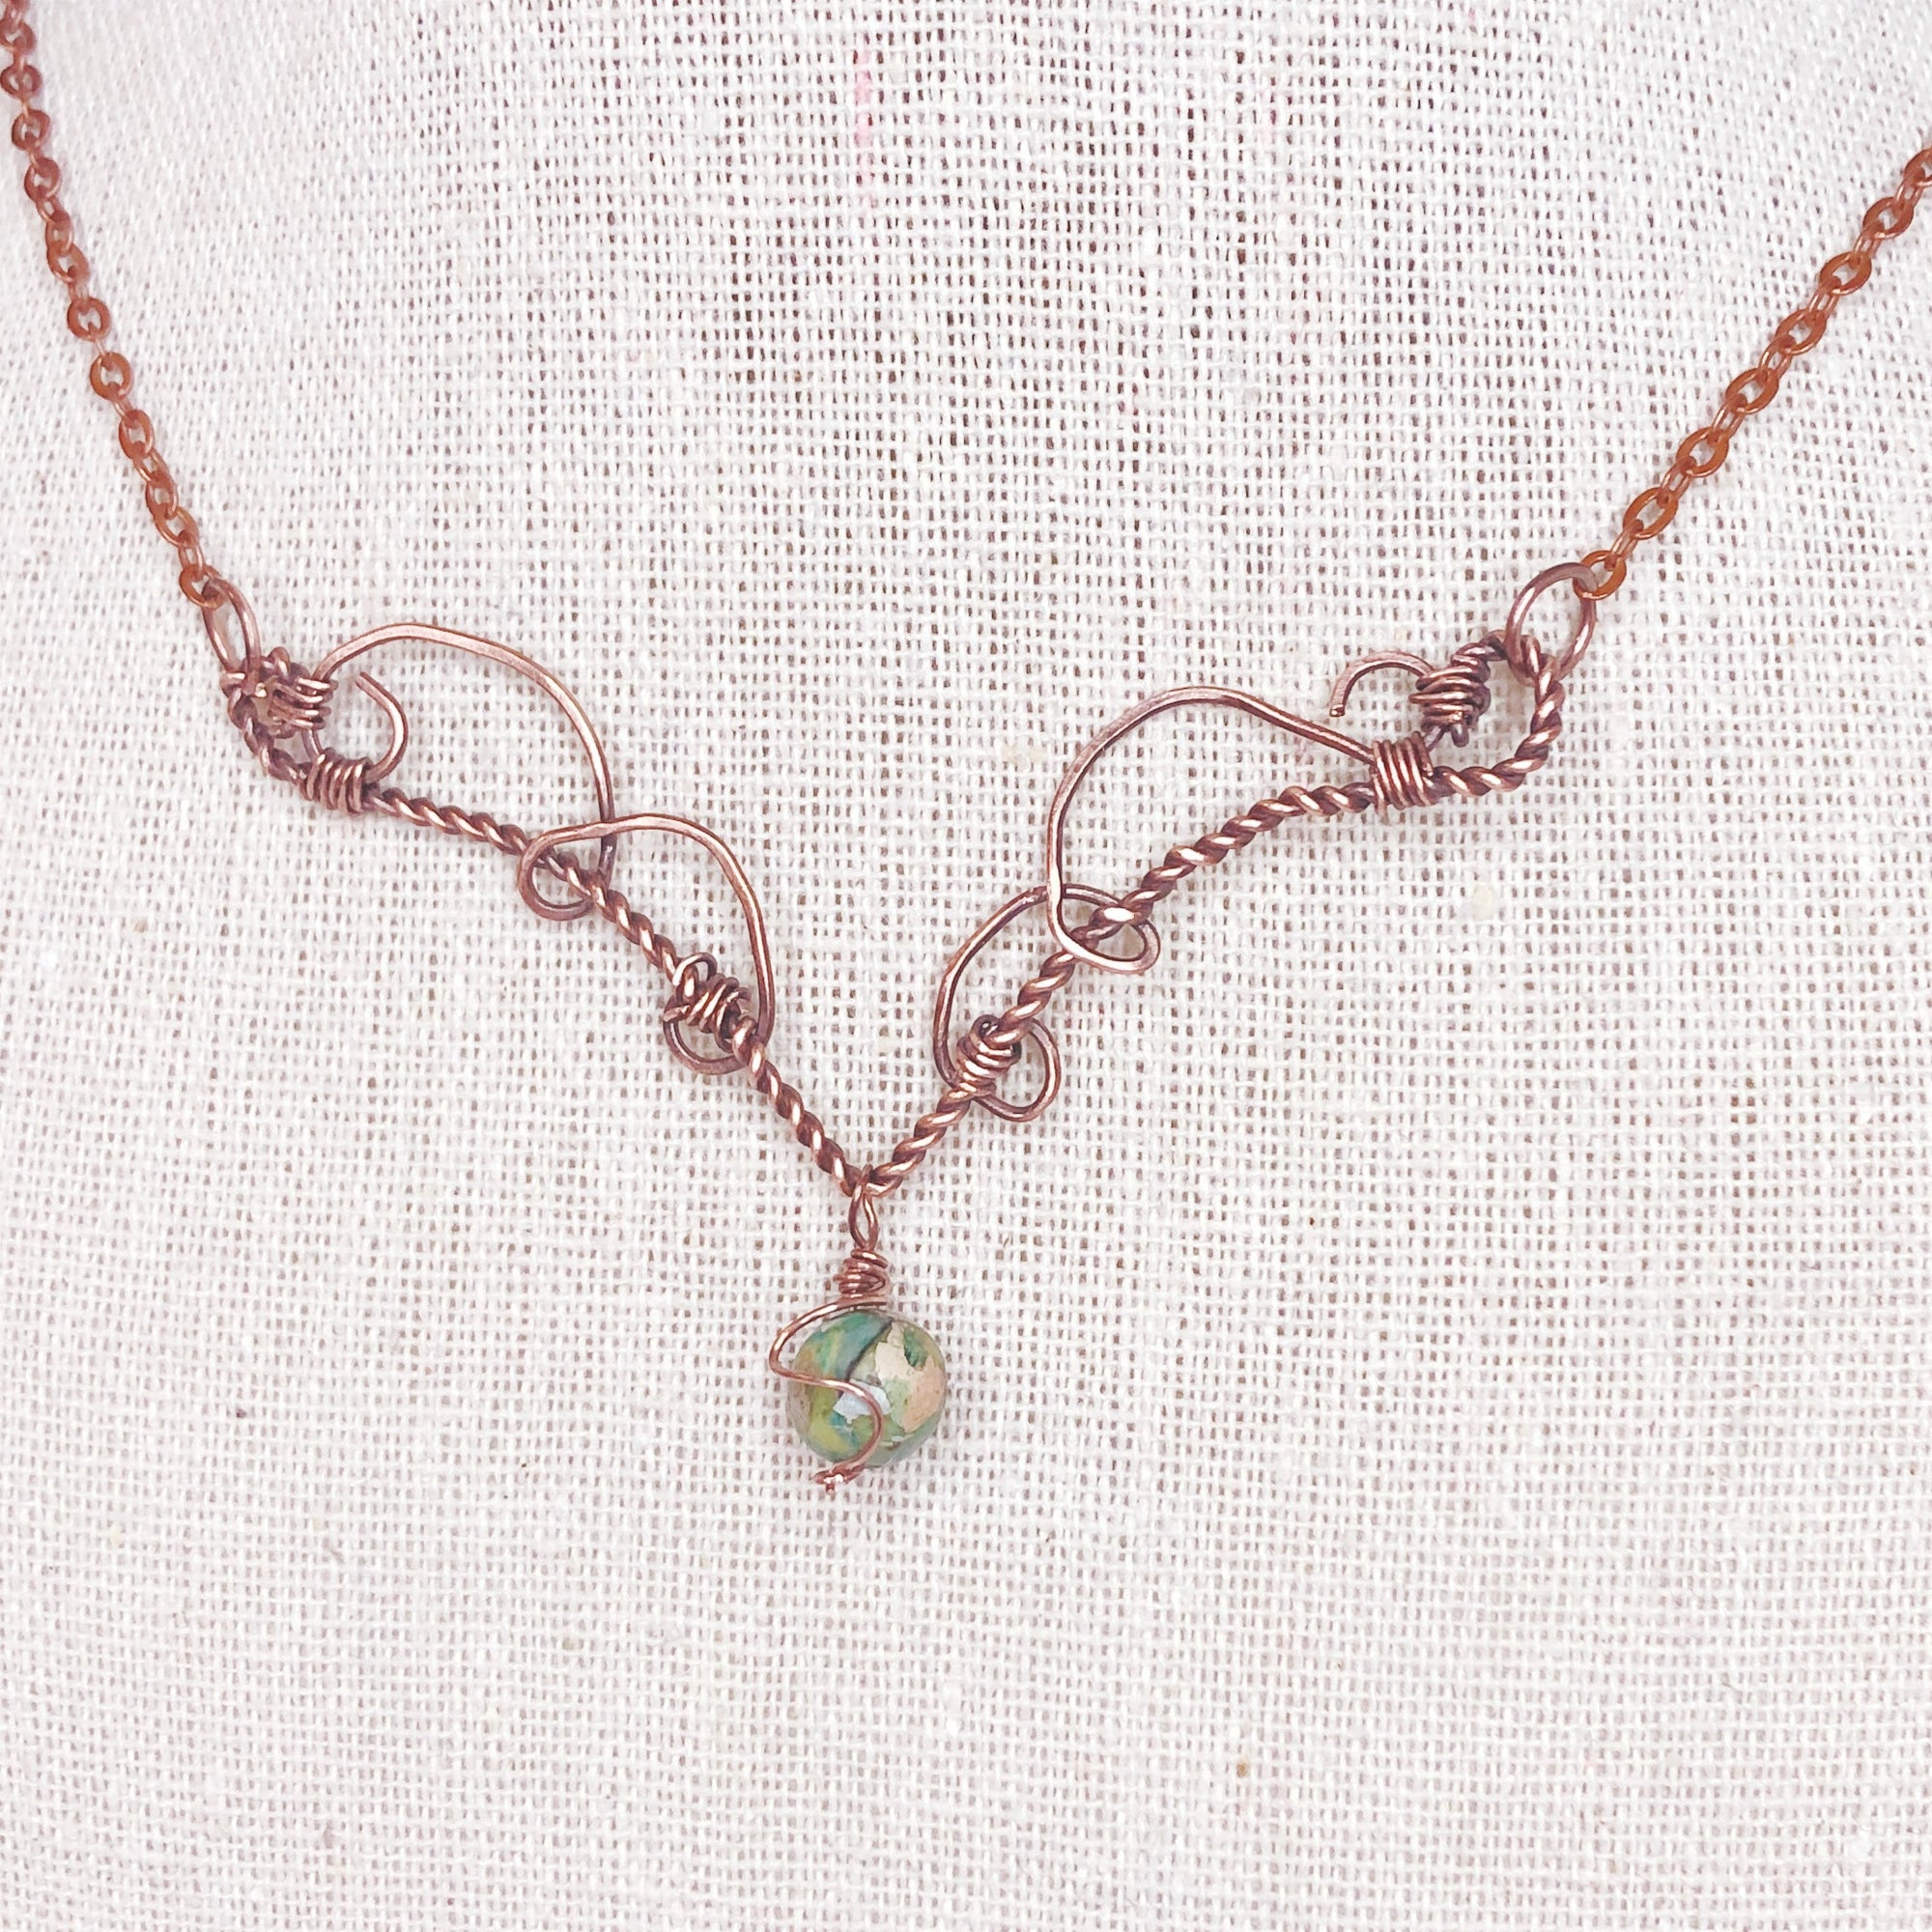 Elvish Fairycore nature inspired necklace with Imperial Jasper stone accent